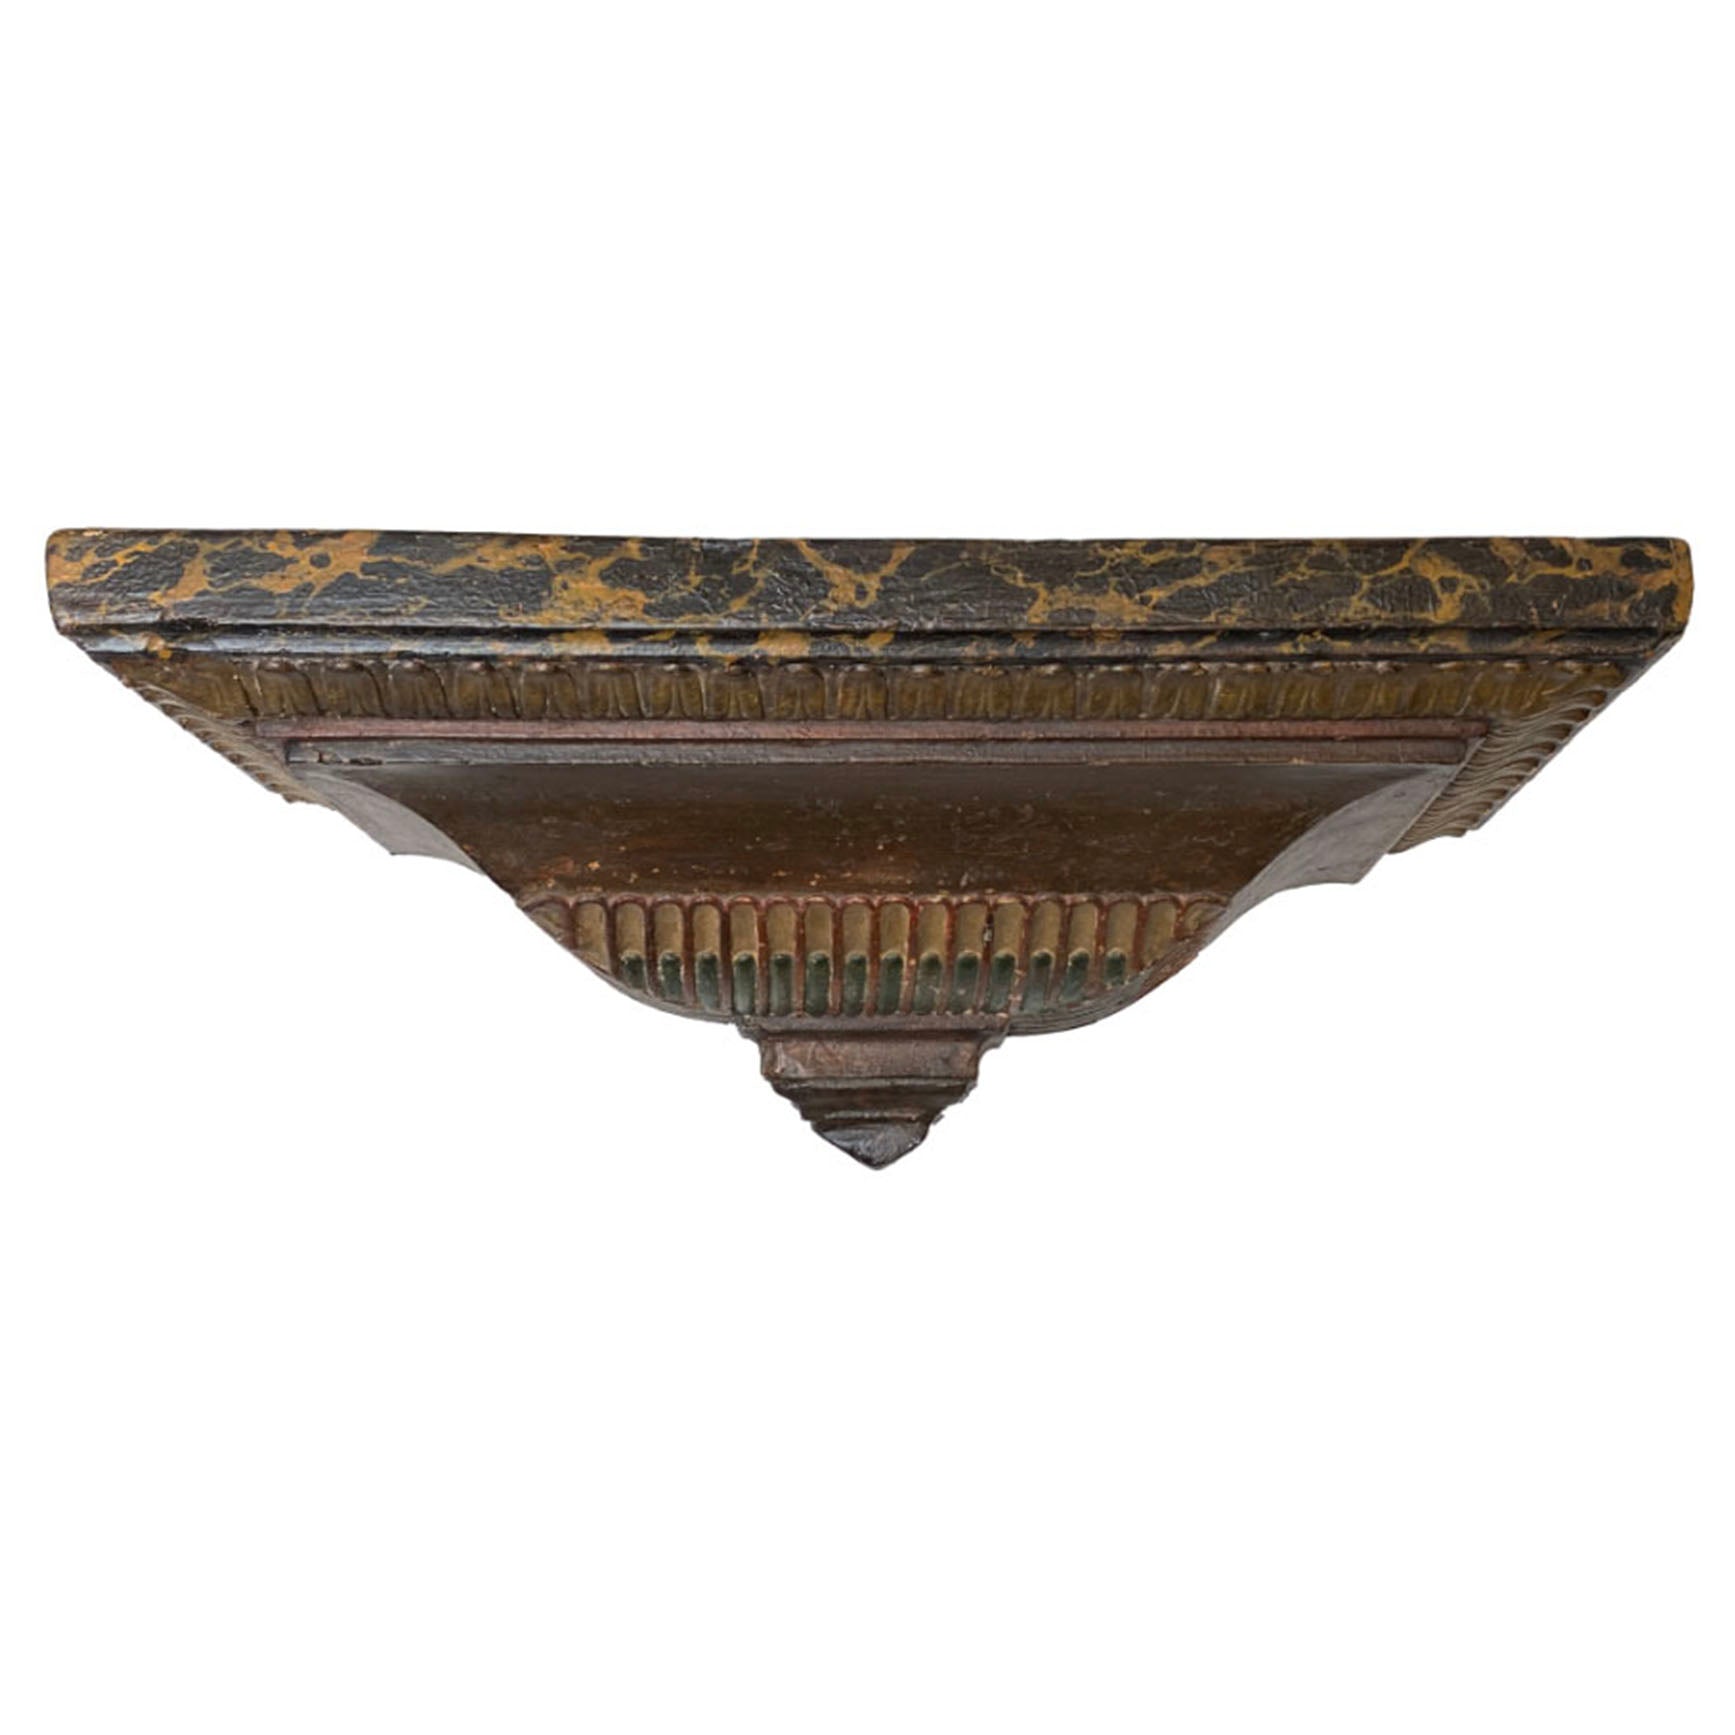 Early 19th C. Italian Architectural Fragment